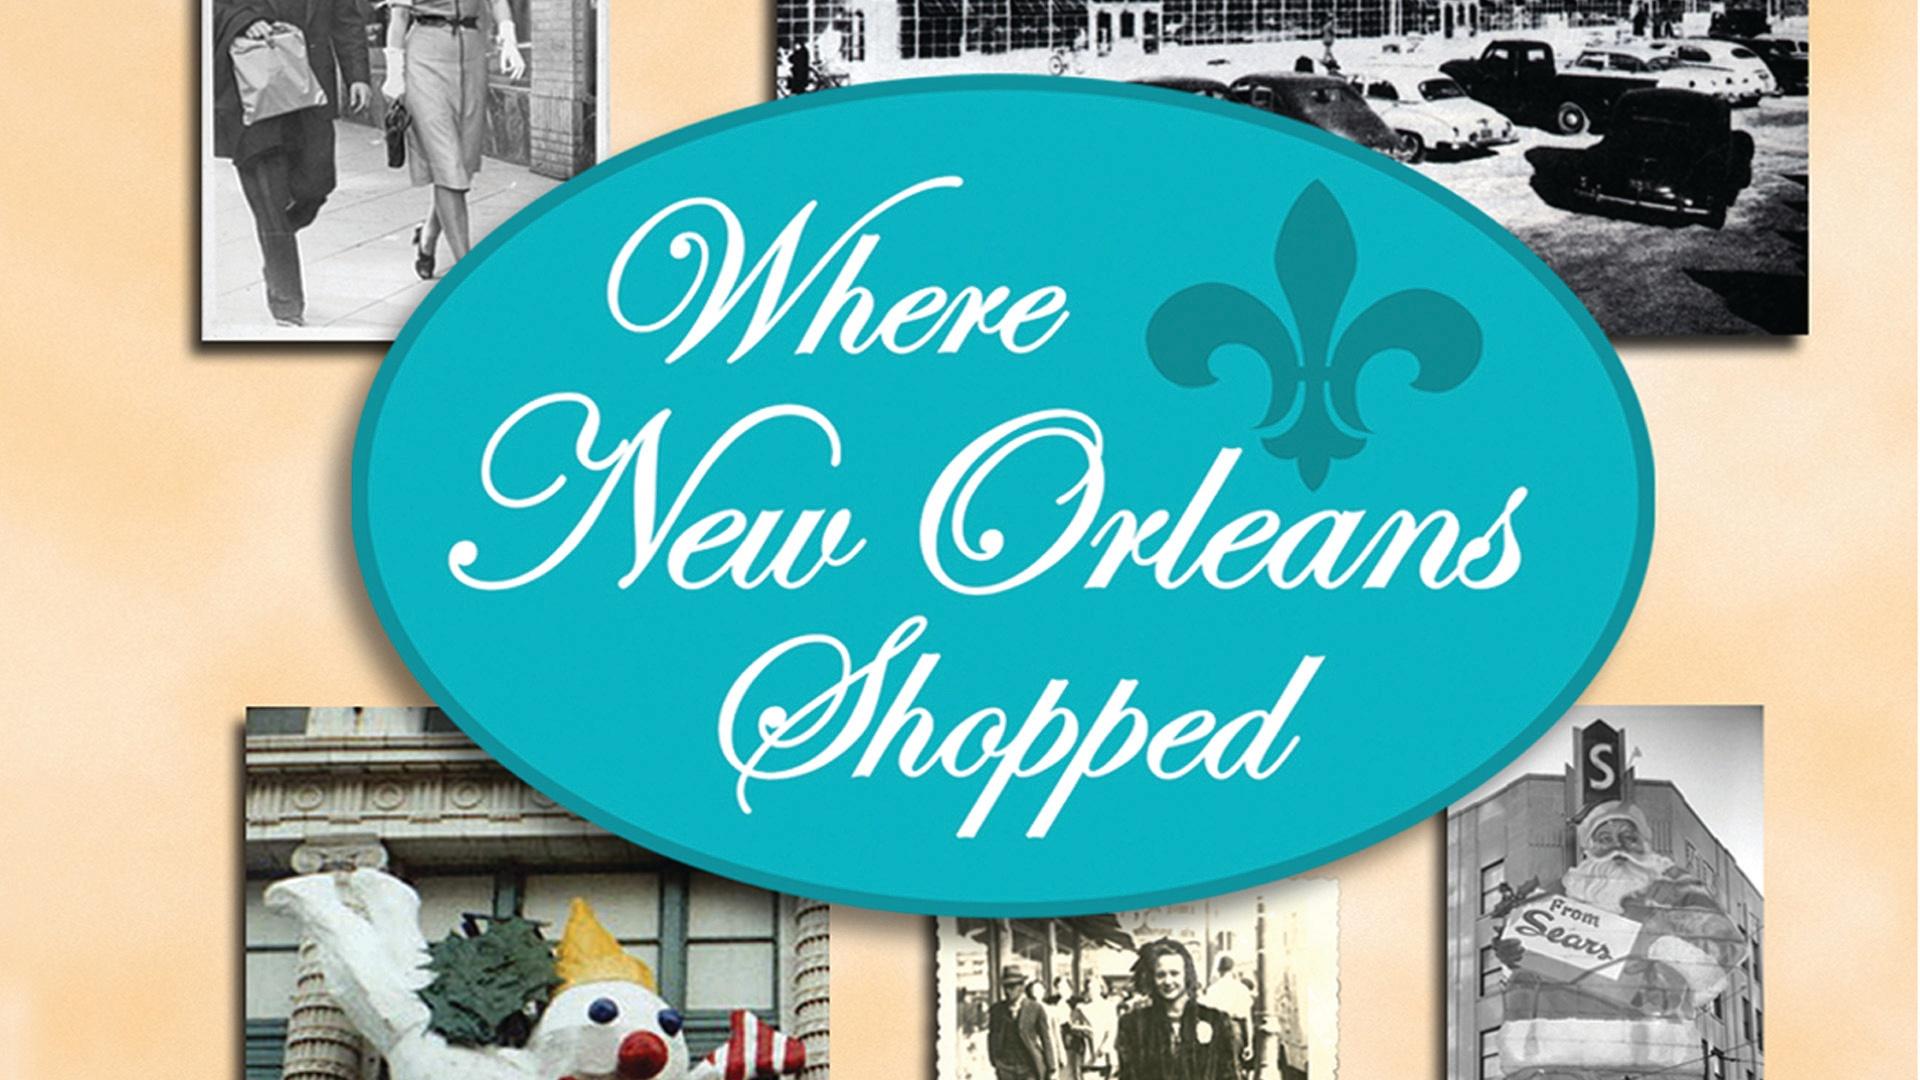 Where New Orleans Shopped